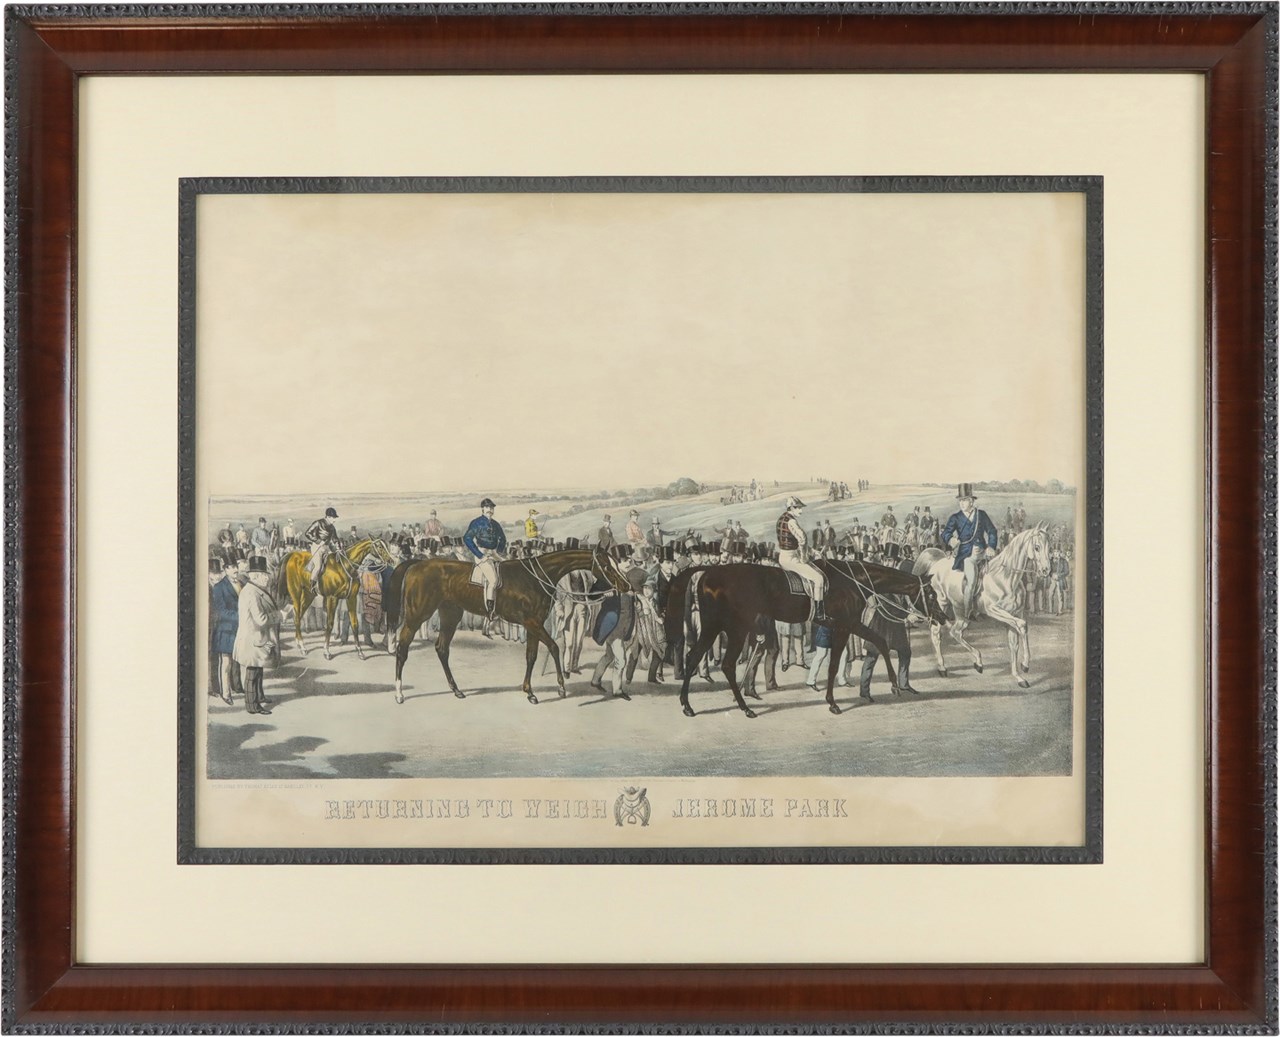 Horse Racing - Gorgeous Framed Print “Returning to Weigh” By Thomas Kelly, 1870